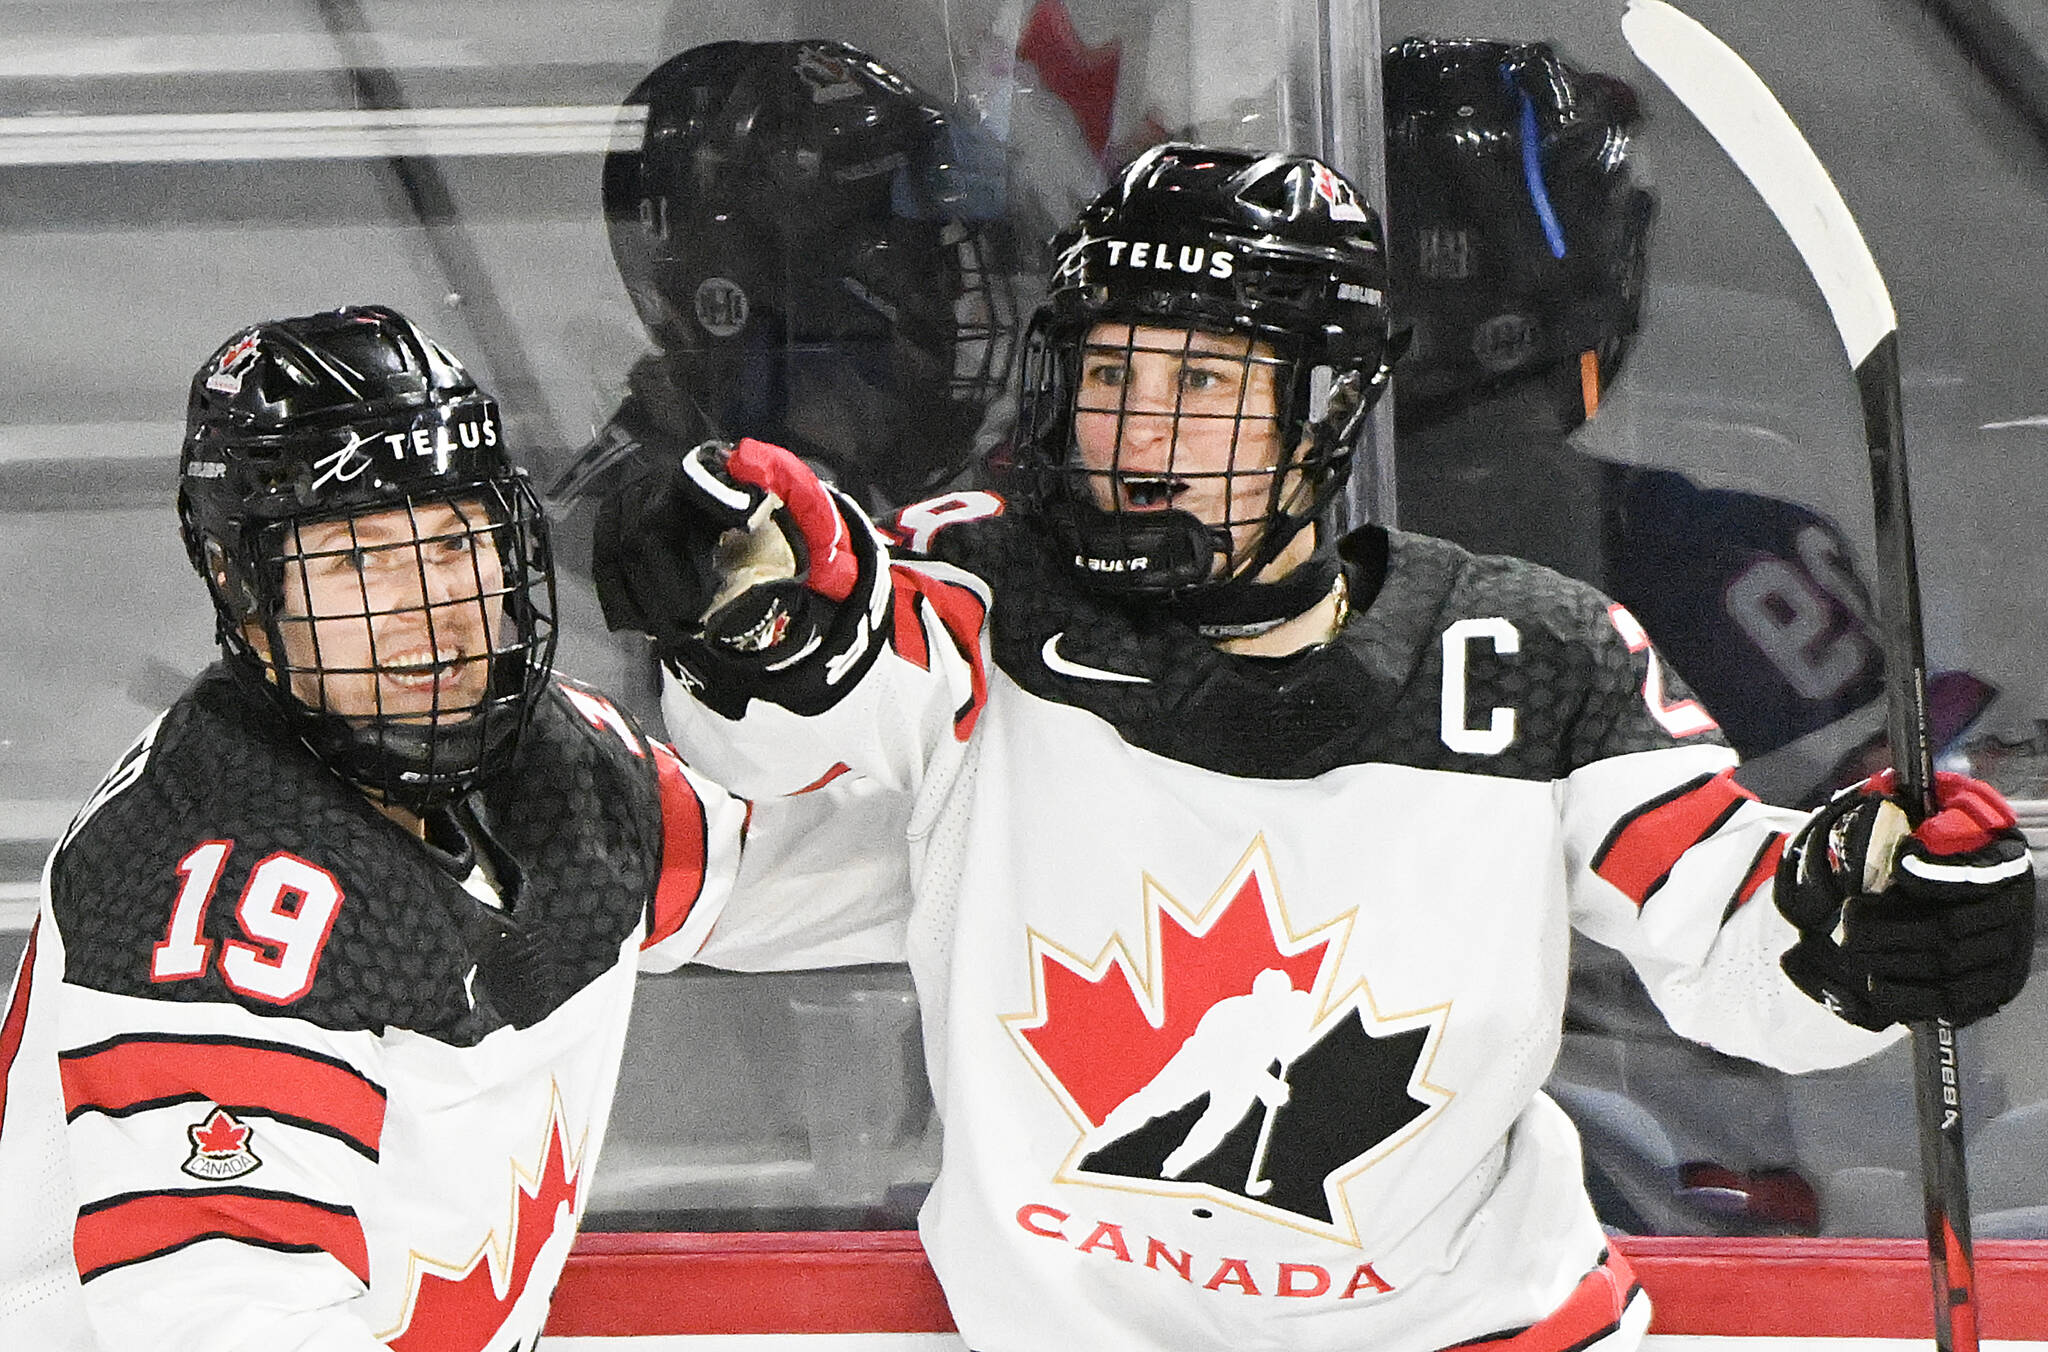 Marie-Philip Poulin (29) of Canada celebrates with teammate Brianne Jenner (19) after scoring against the USA during second period Rivalry Series hockey action in Laval, Que., Wednesday, February 22, 2023. Canada opens defence of its women’s world hockey championship against Switzerland on Wednesday. THE CANADIAN PRESS/Graham Hughes